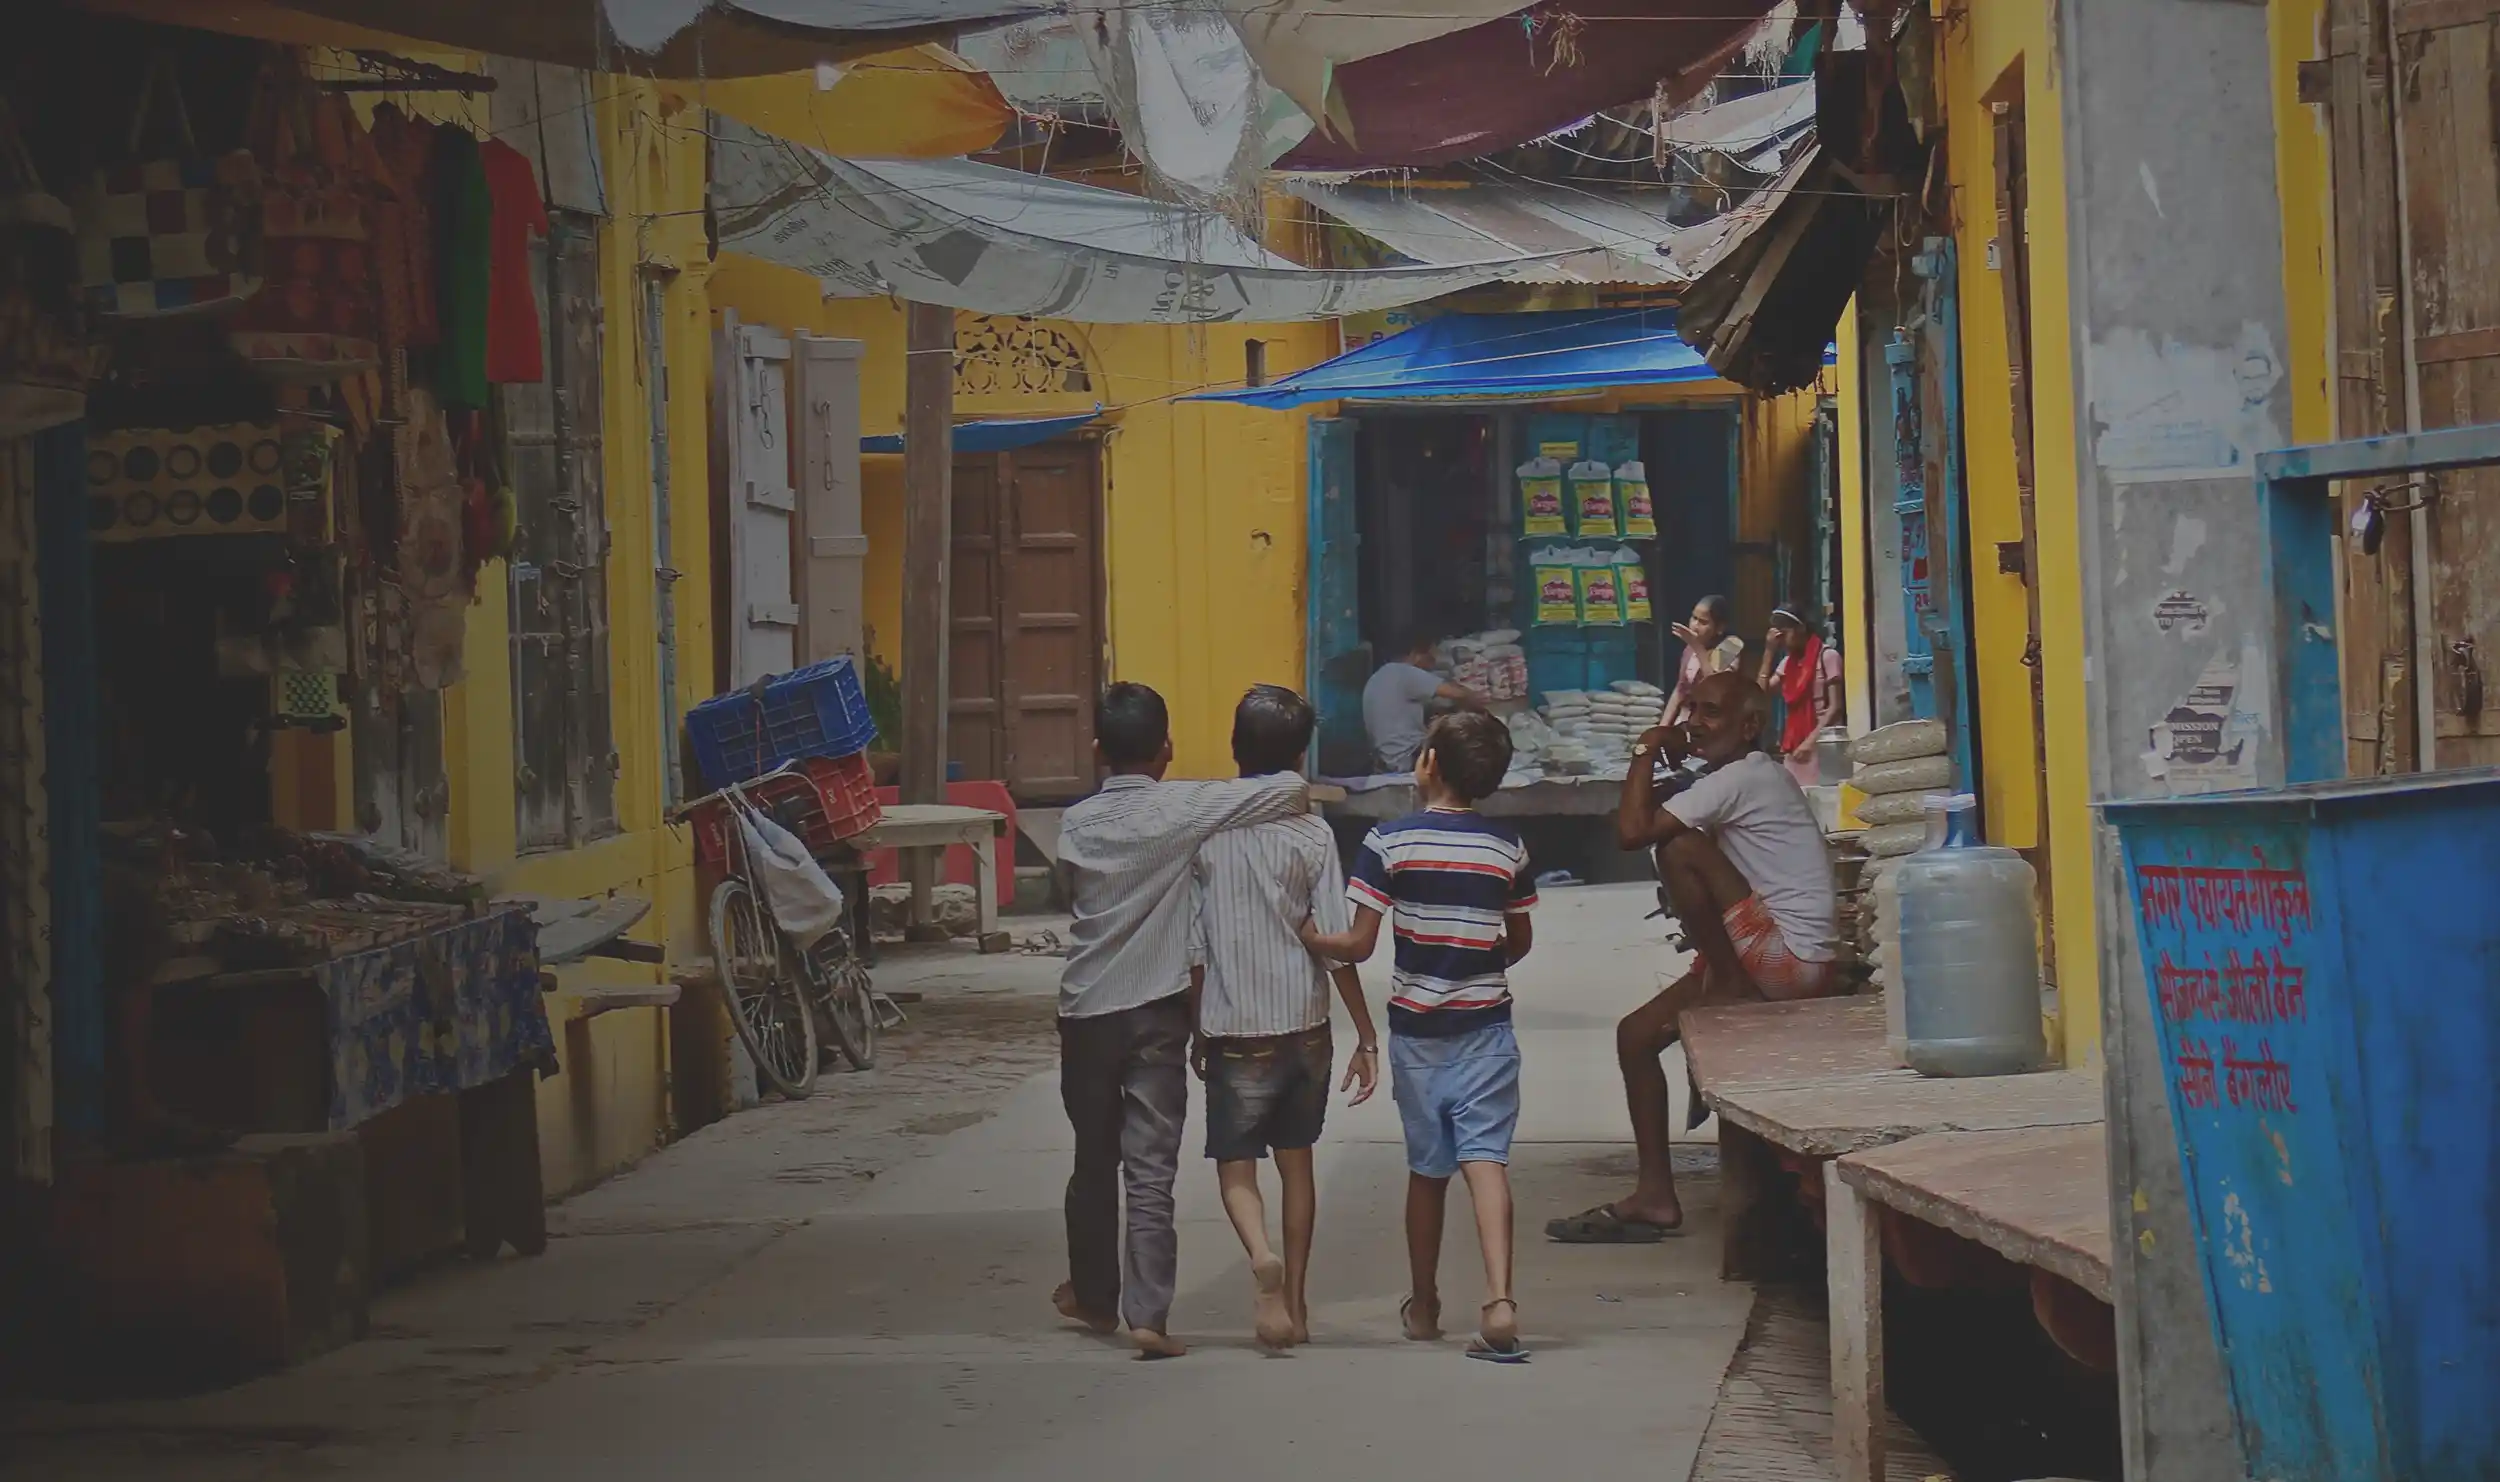 Three kids walking down the street in South Asia